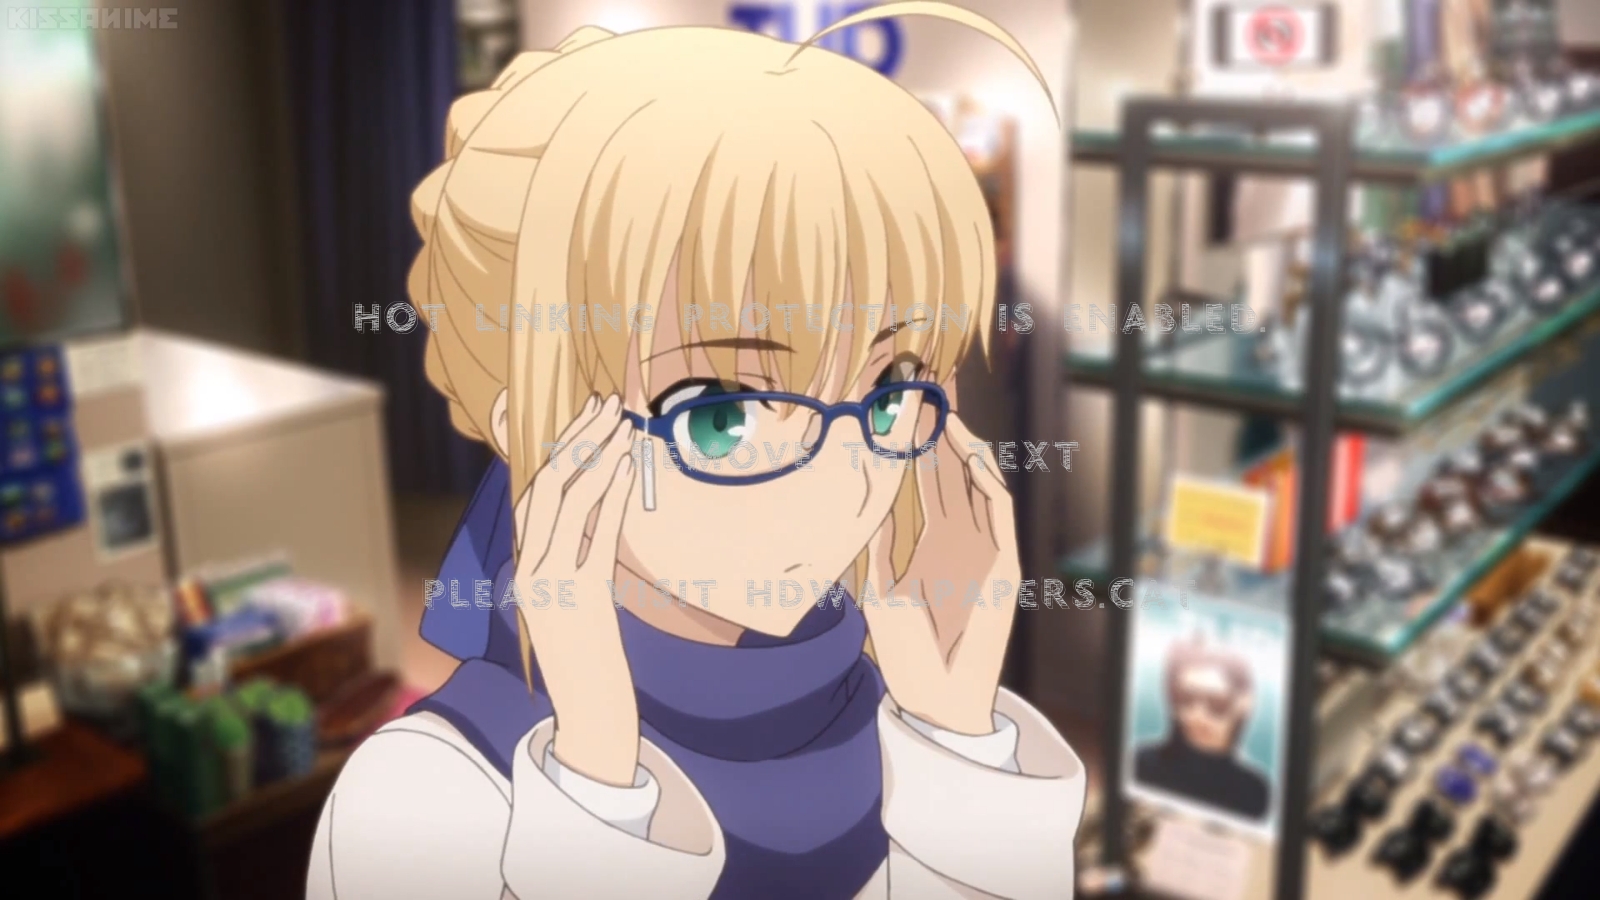 Spectacles Blond Hair Blonde Kawaii Anime - Fate Stay Night Unlimited Blade Works Glasses - HD Wallpaper 